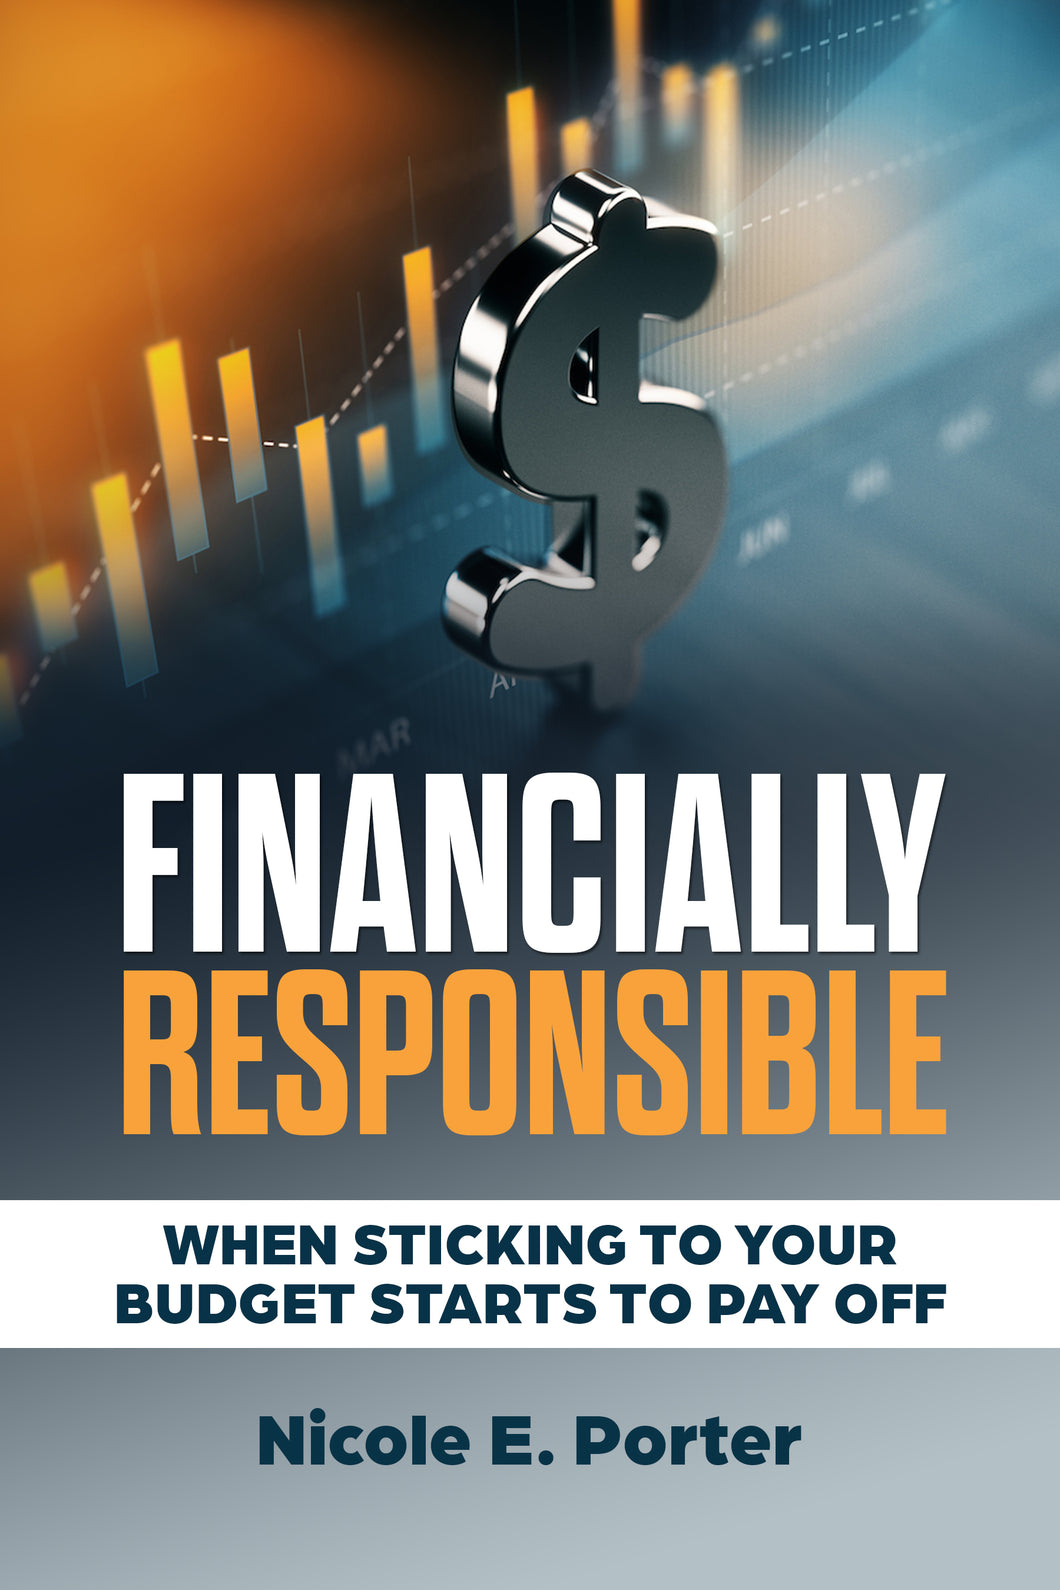 Financially Responsible: When Sticking To Your Budget Starts To Pay Off